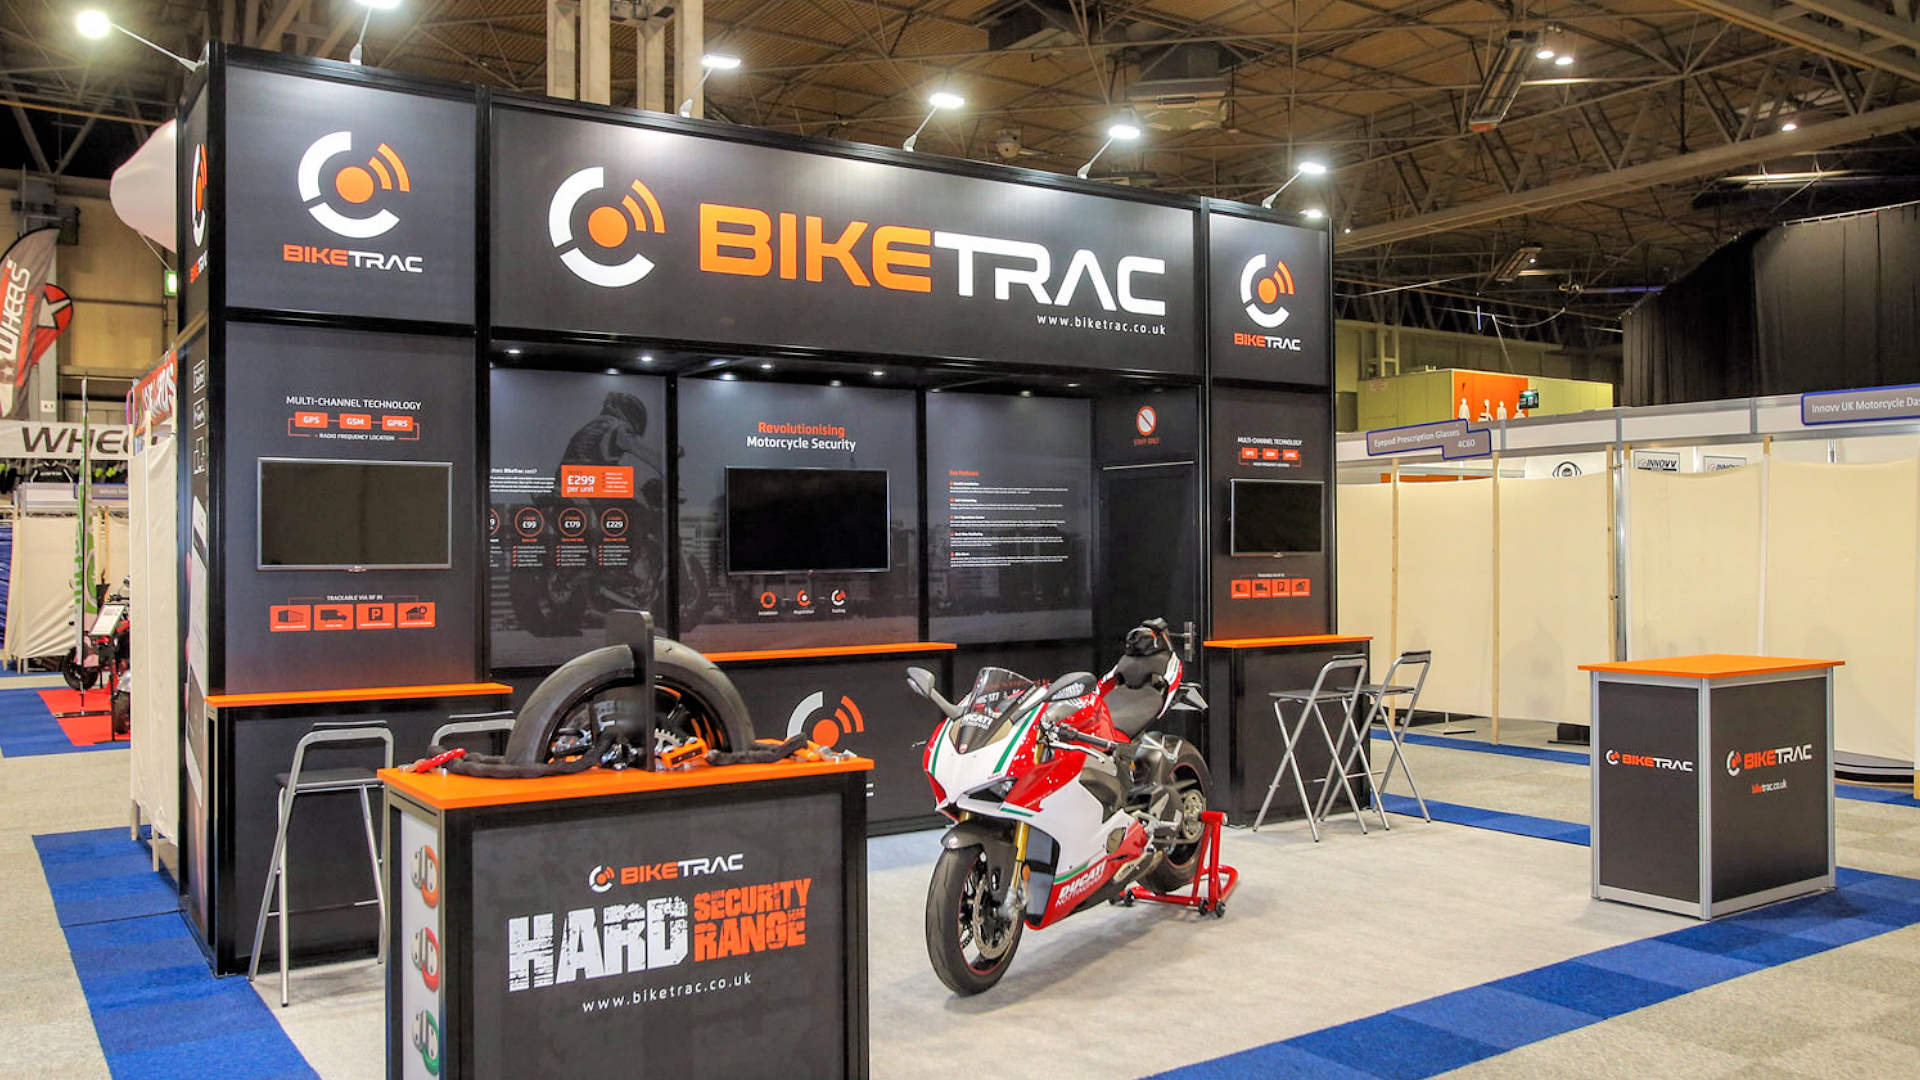 BikeTrac motorcycle security and tracking